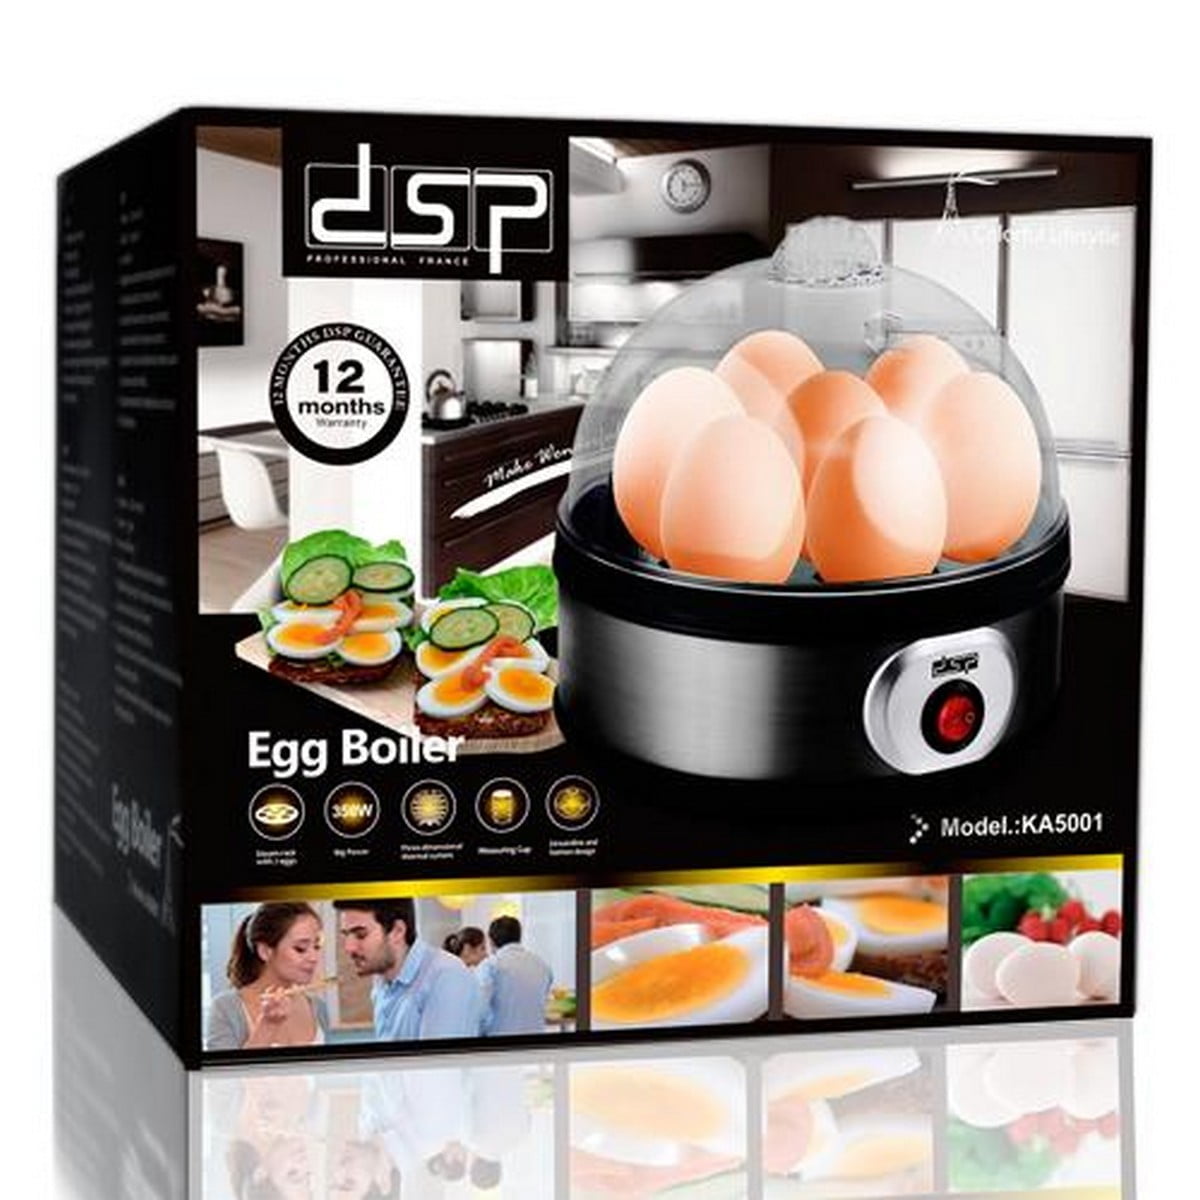 075B5C816E6Bceb391F2Ca2B6419848E &Lt;H1&Gt;Dsp Professional Egg Boiler&Lt;/H1&Gt; &Lt;Div Id=&Quot;Pastingspan1&Quot;&Gt;Power: 350W Capacity: 7 Eggs Cooking Soft And Hard Eggs Handy Measuring Cup Included Buzzer Timing Alarm Function When Eggs Are Ready Removable Lid &Amp; Cooking Rack For Easy Cleaning&Lt;/Div&Gt; Egg Boiler Egg Boiler - Ka5001